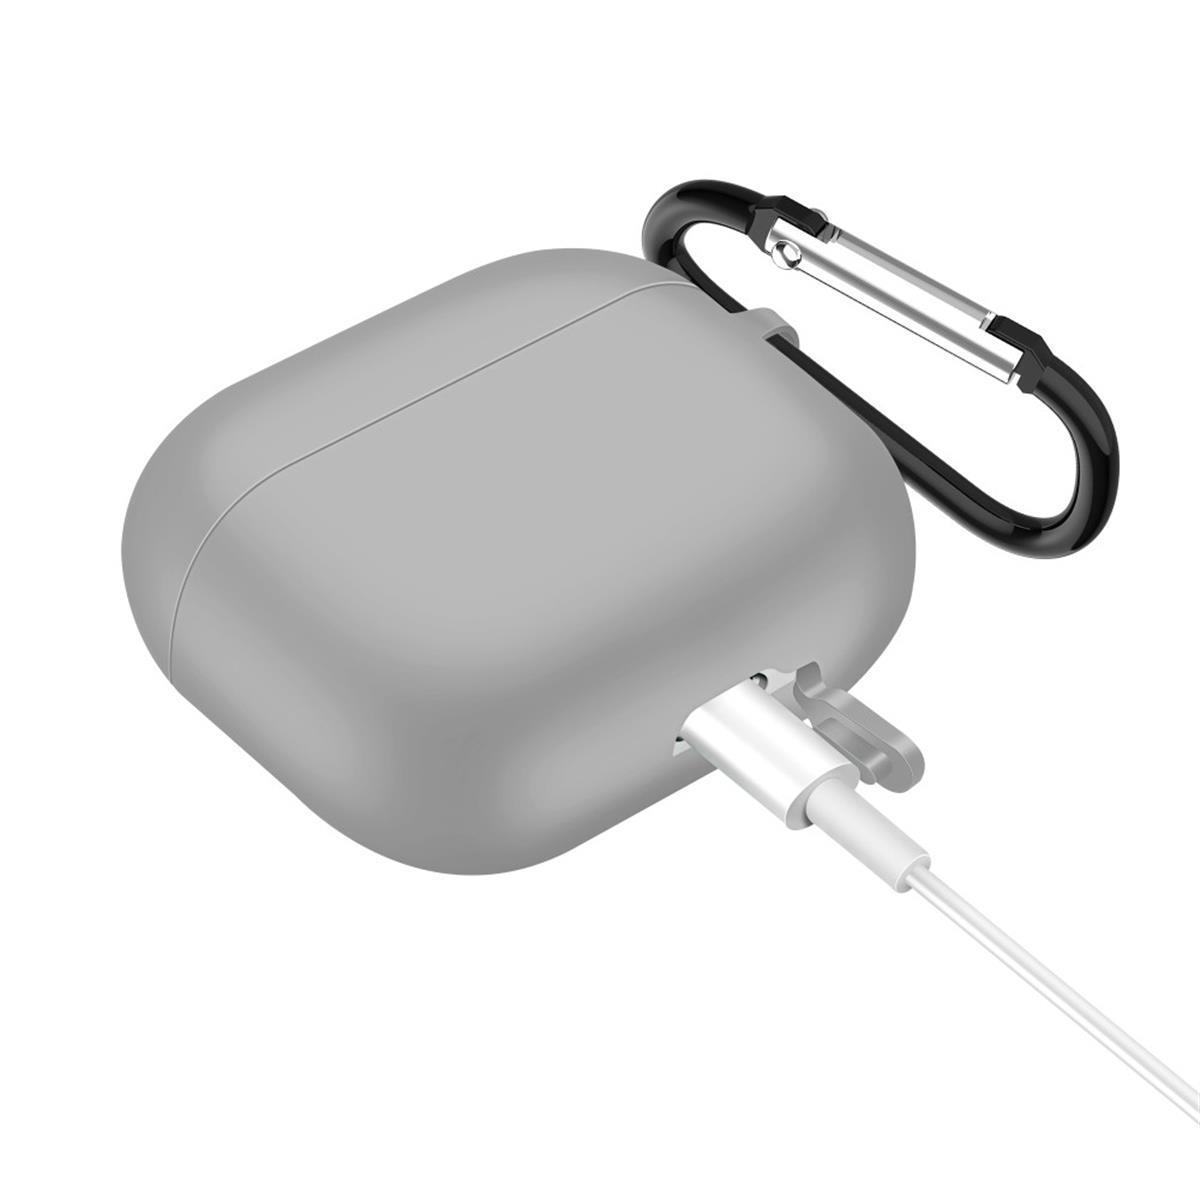 AirPods Grau, Ladecase Silikoncover COVERKINGZ Herren, für 76802 Apple 3